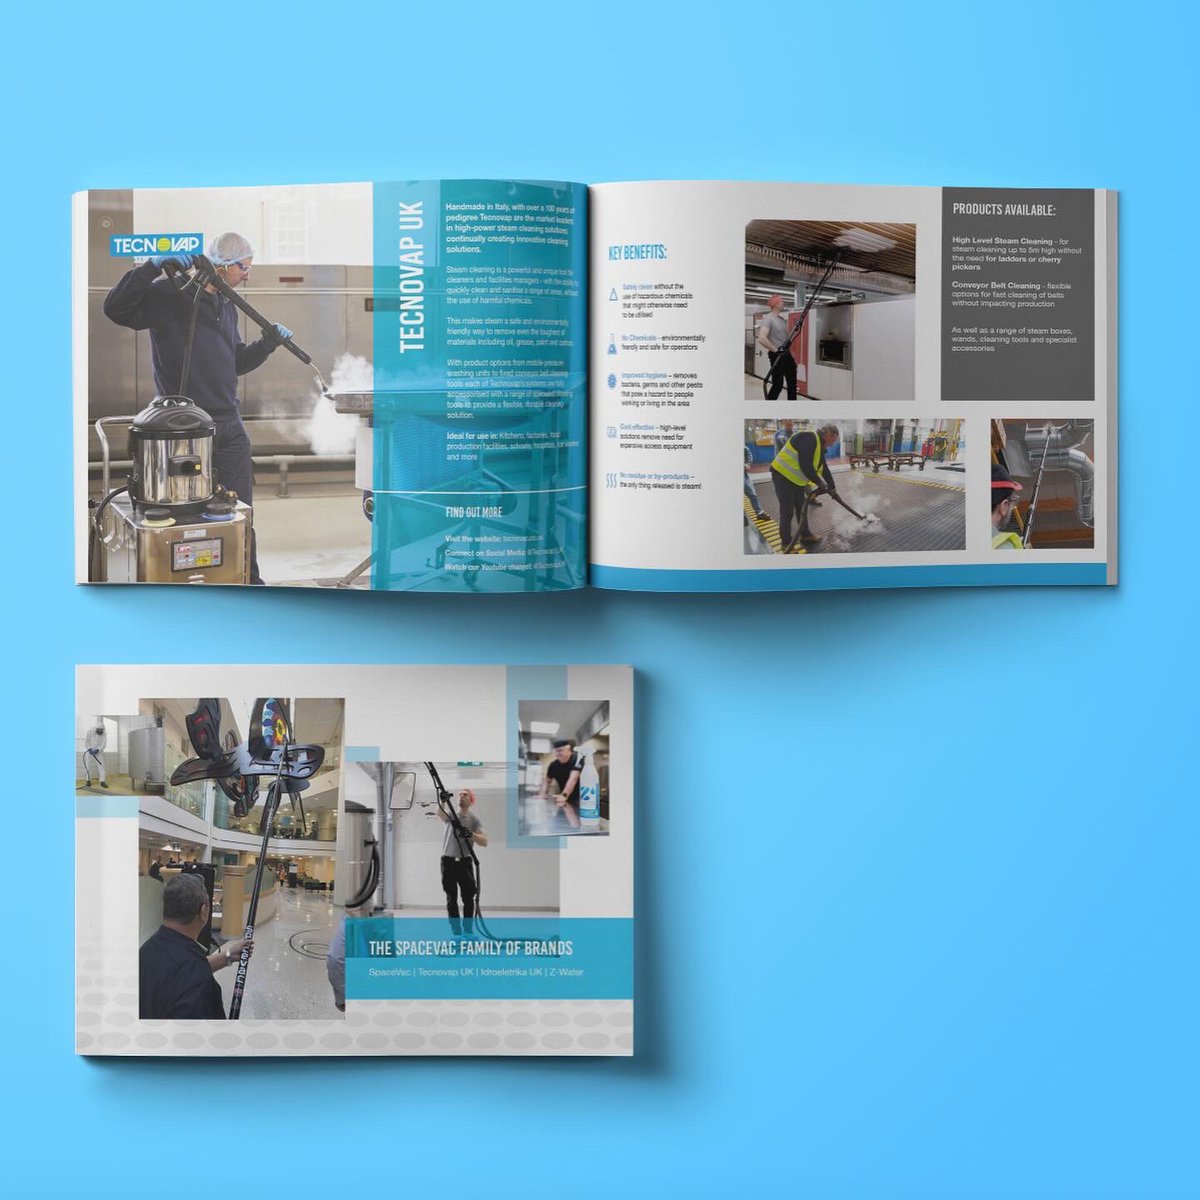 Some recent design projects we’ve delivered for some of our clients locally including technical specifications sheets, postcards, brochures and more… Get in touch if you’ve got creative projects upcoming that require assistance! info@soverycreative.com